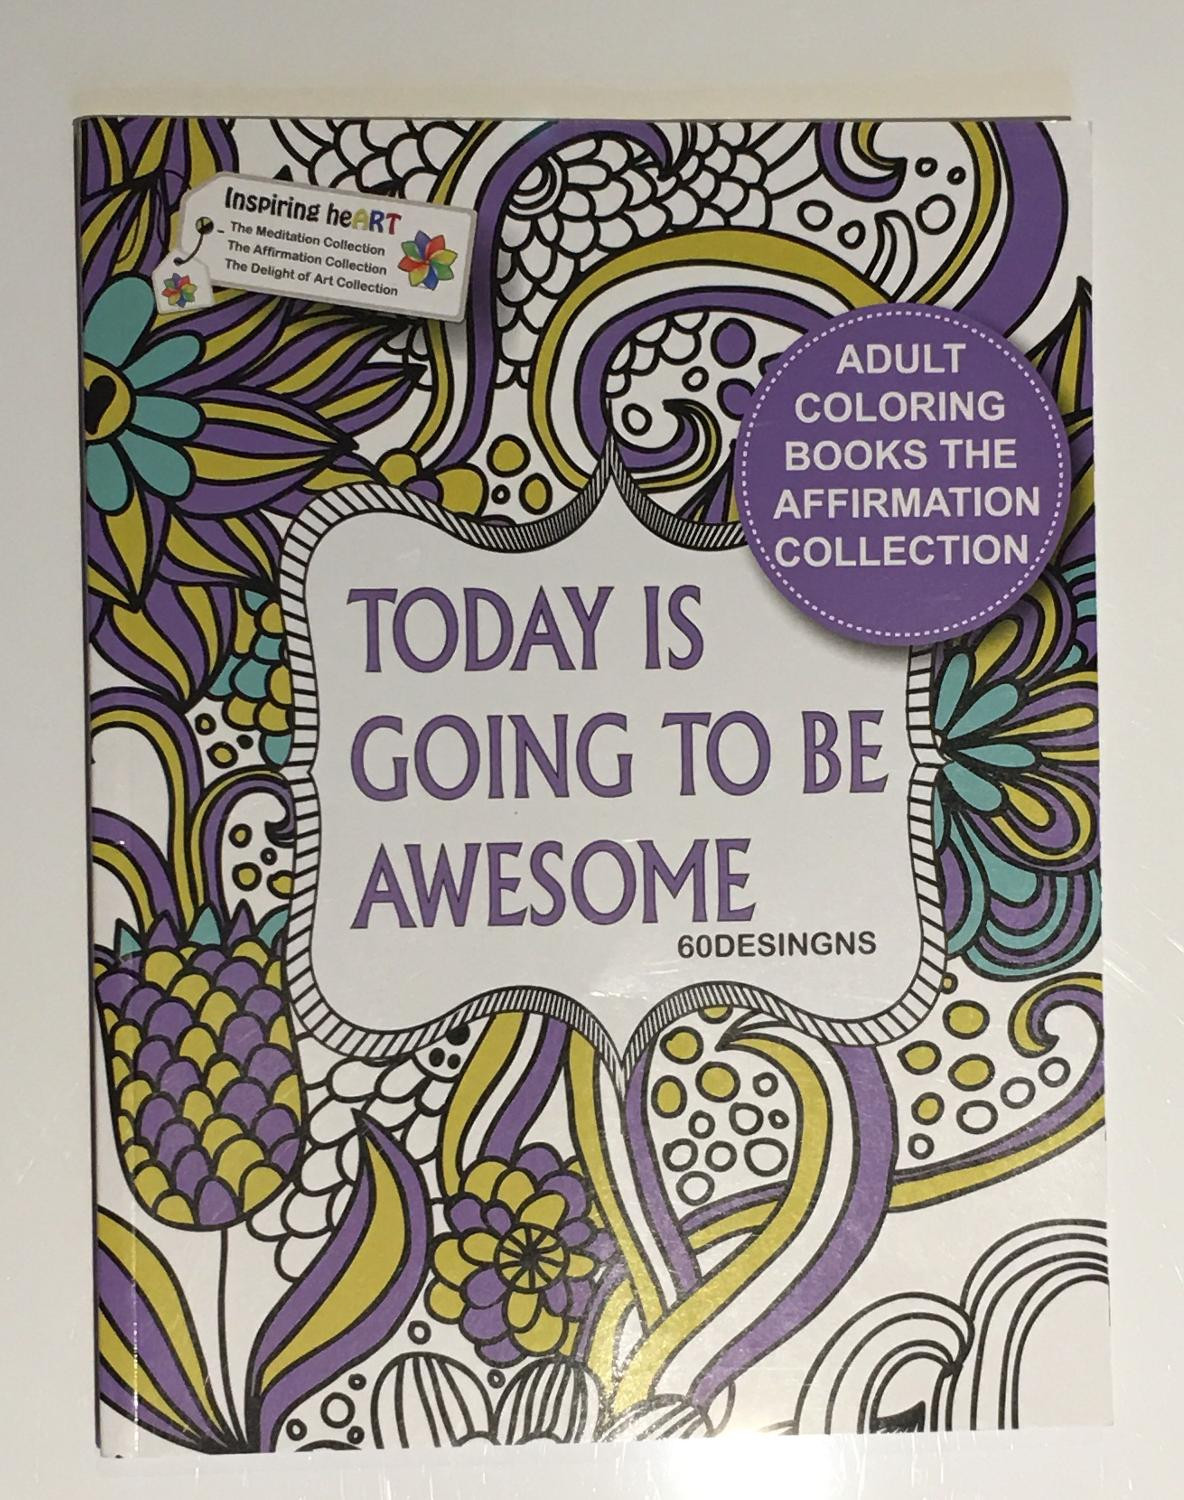 Adult Coloring Books For Sale
 Find more Adult Coloring Book 60 Designs the Affirmation